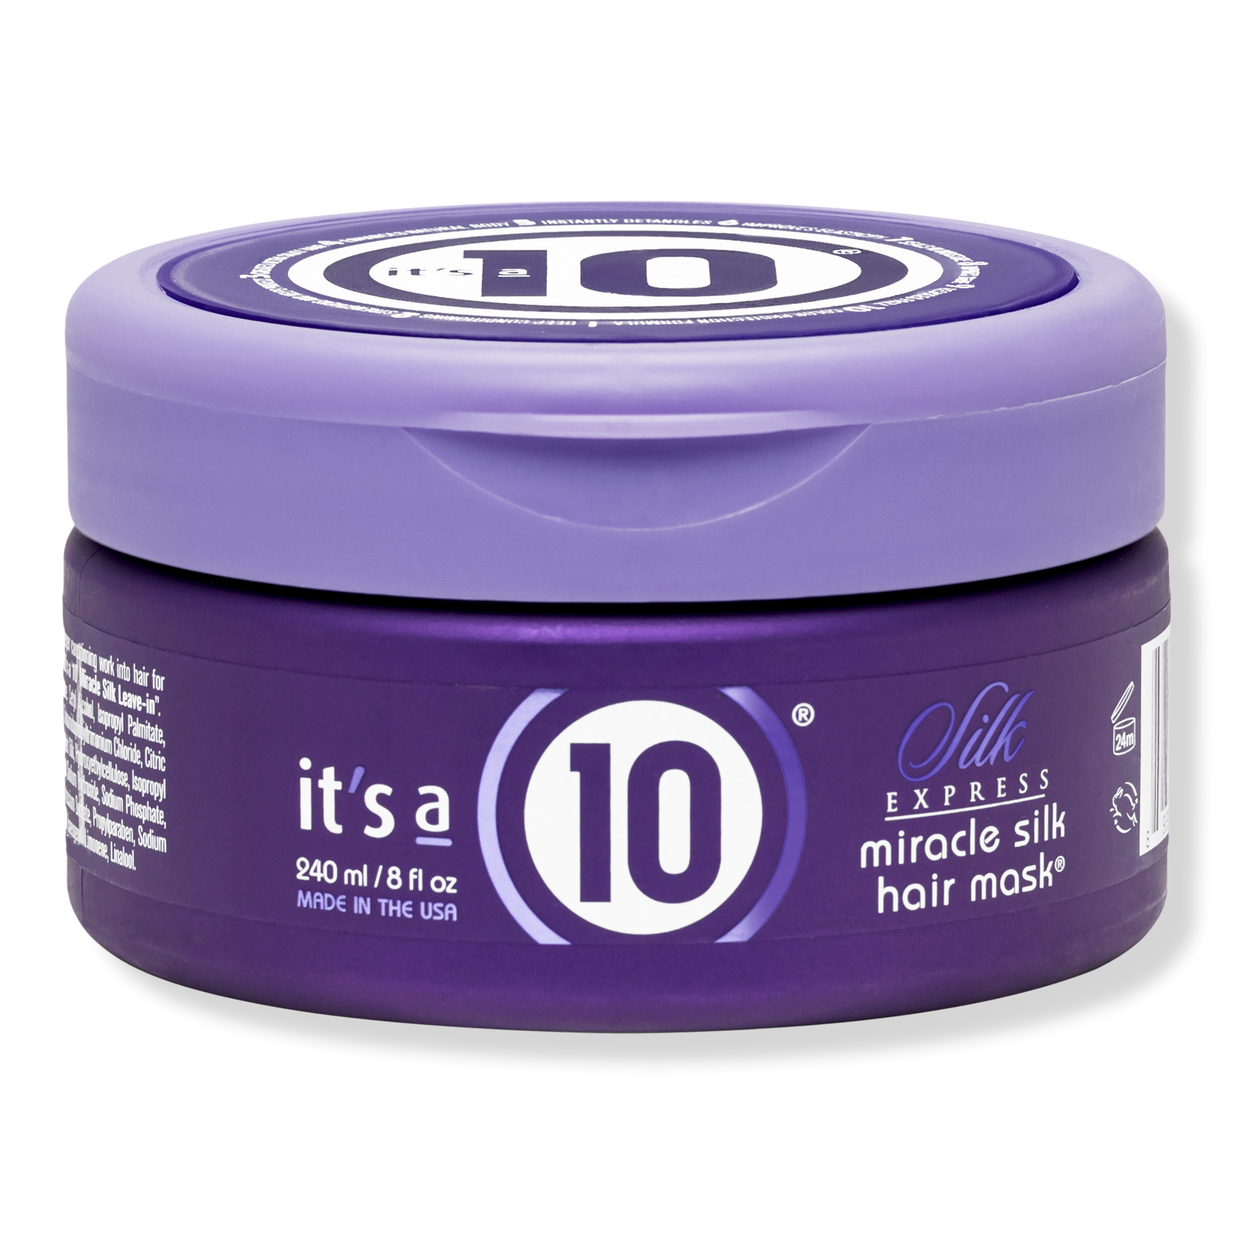 I Tried the It's A 10 Miracle Hair Mask on My 4A Curls